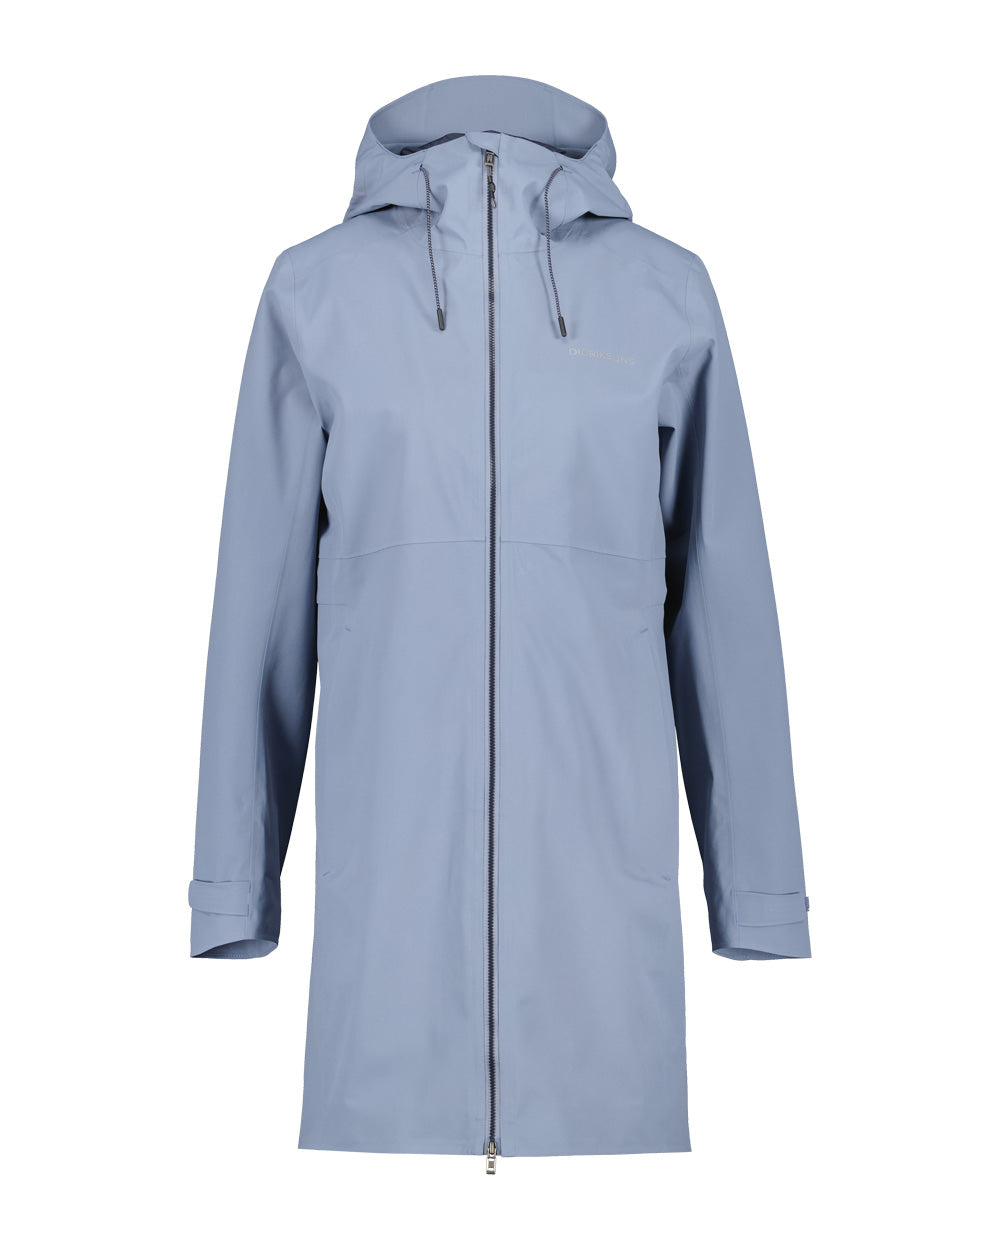 Glacial Blue coloured Didriksons Bea Womens Parka on White background 